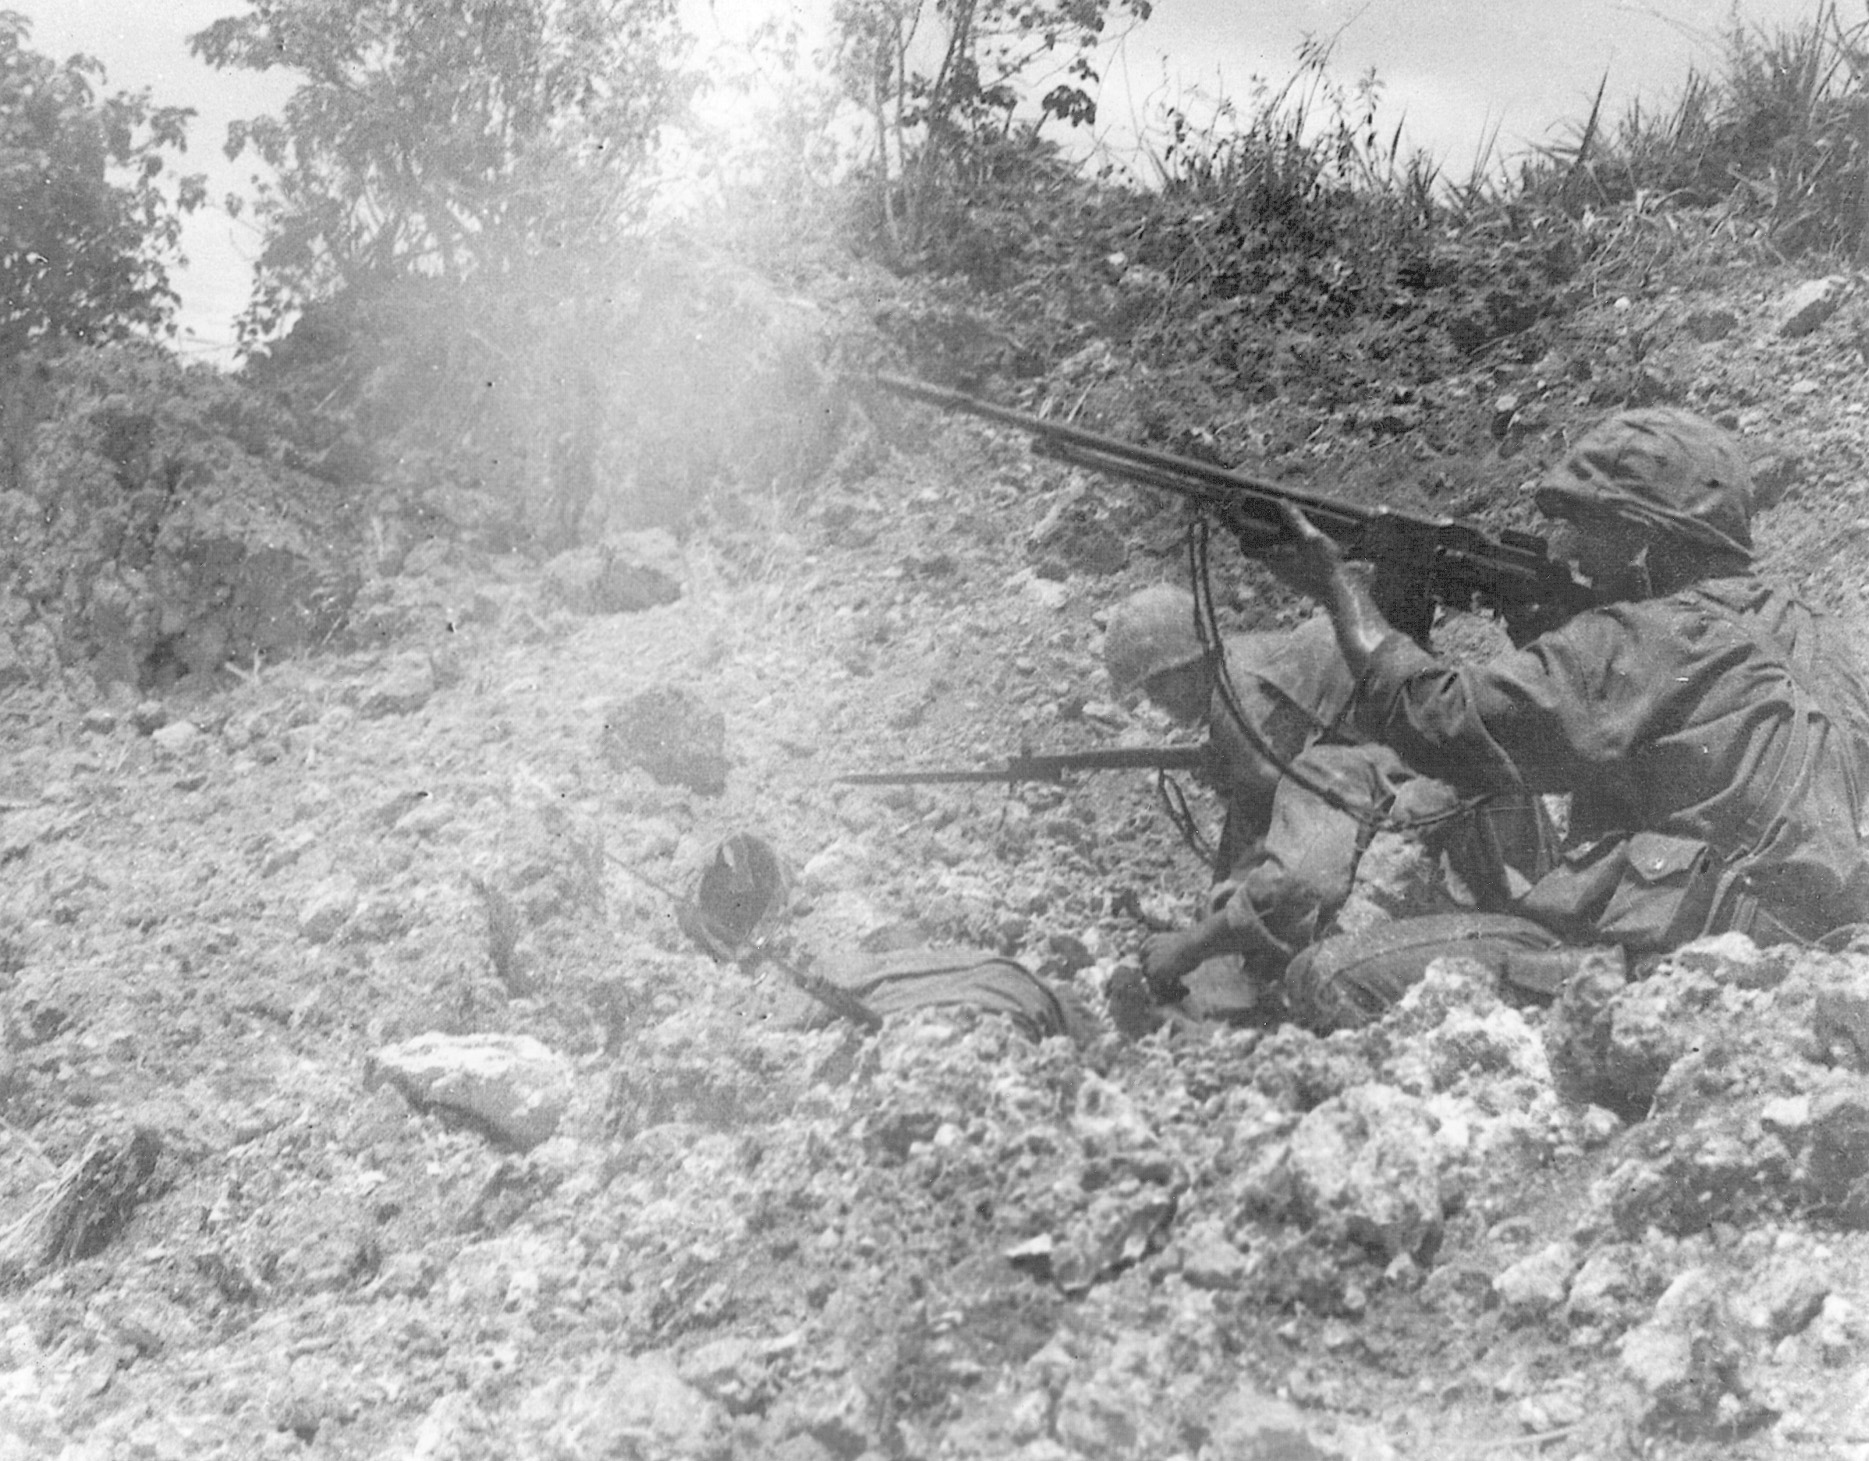 From an exposed position roughly 400 yards ahead of the front line, a Marine rises to fire his Browning Automatic Rifle (BAR).